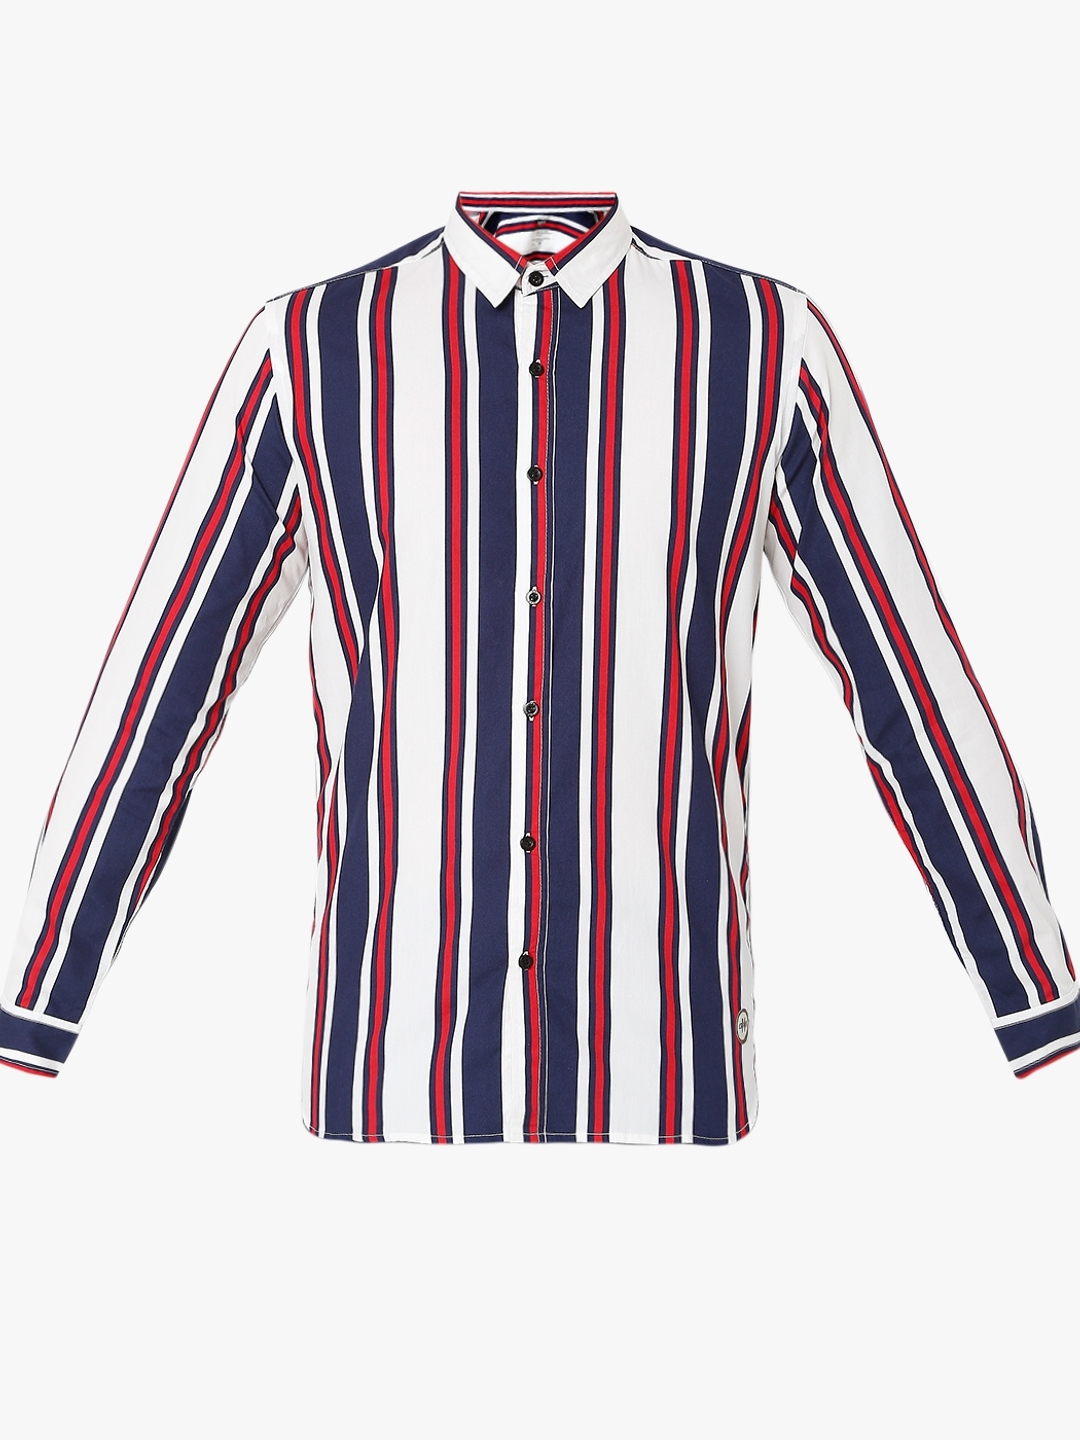 S.Det Striped Relaxed Fit Shirt